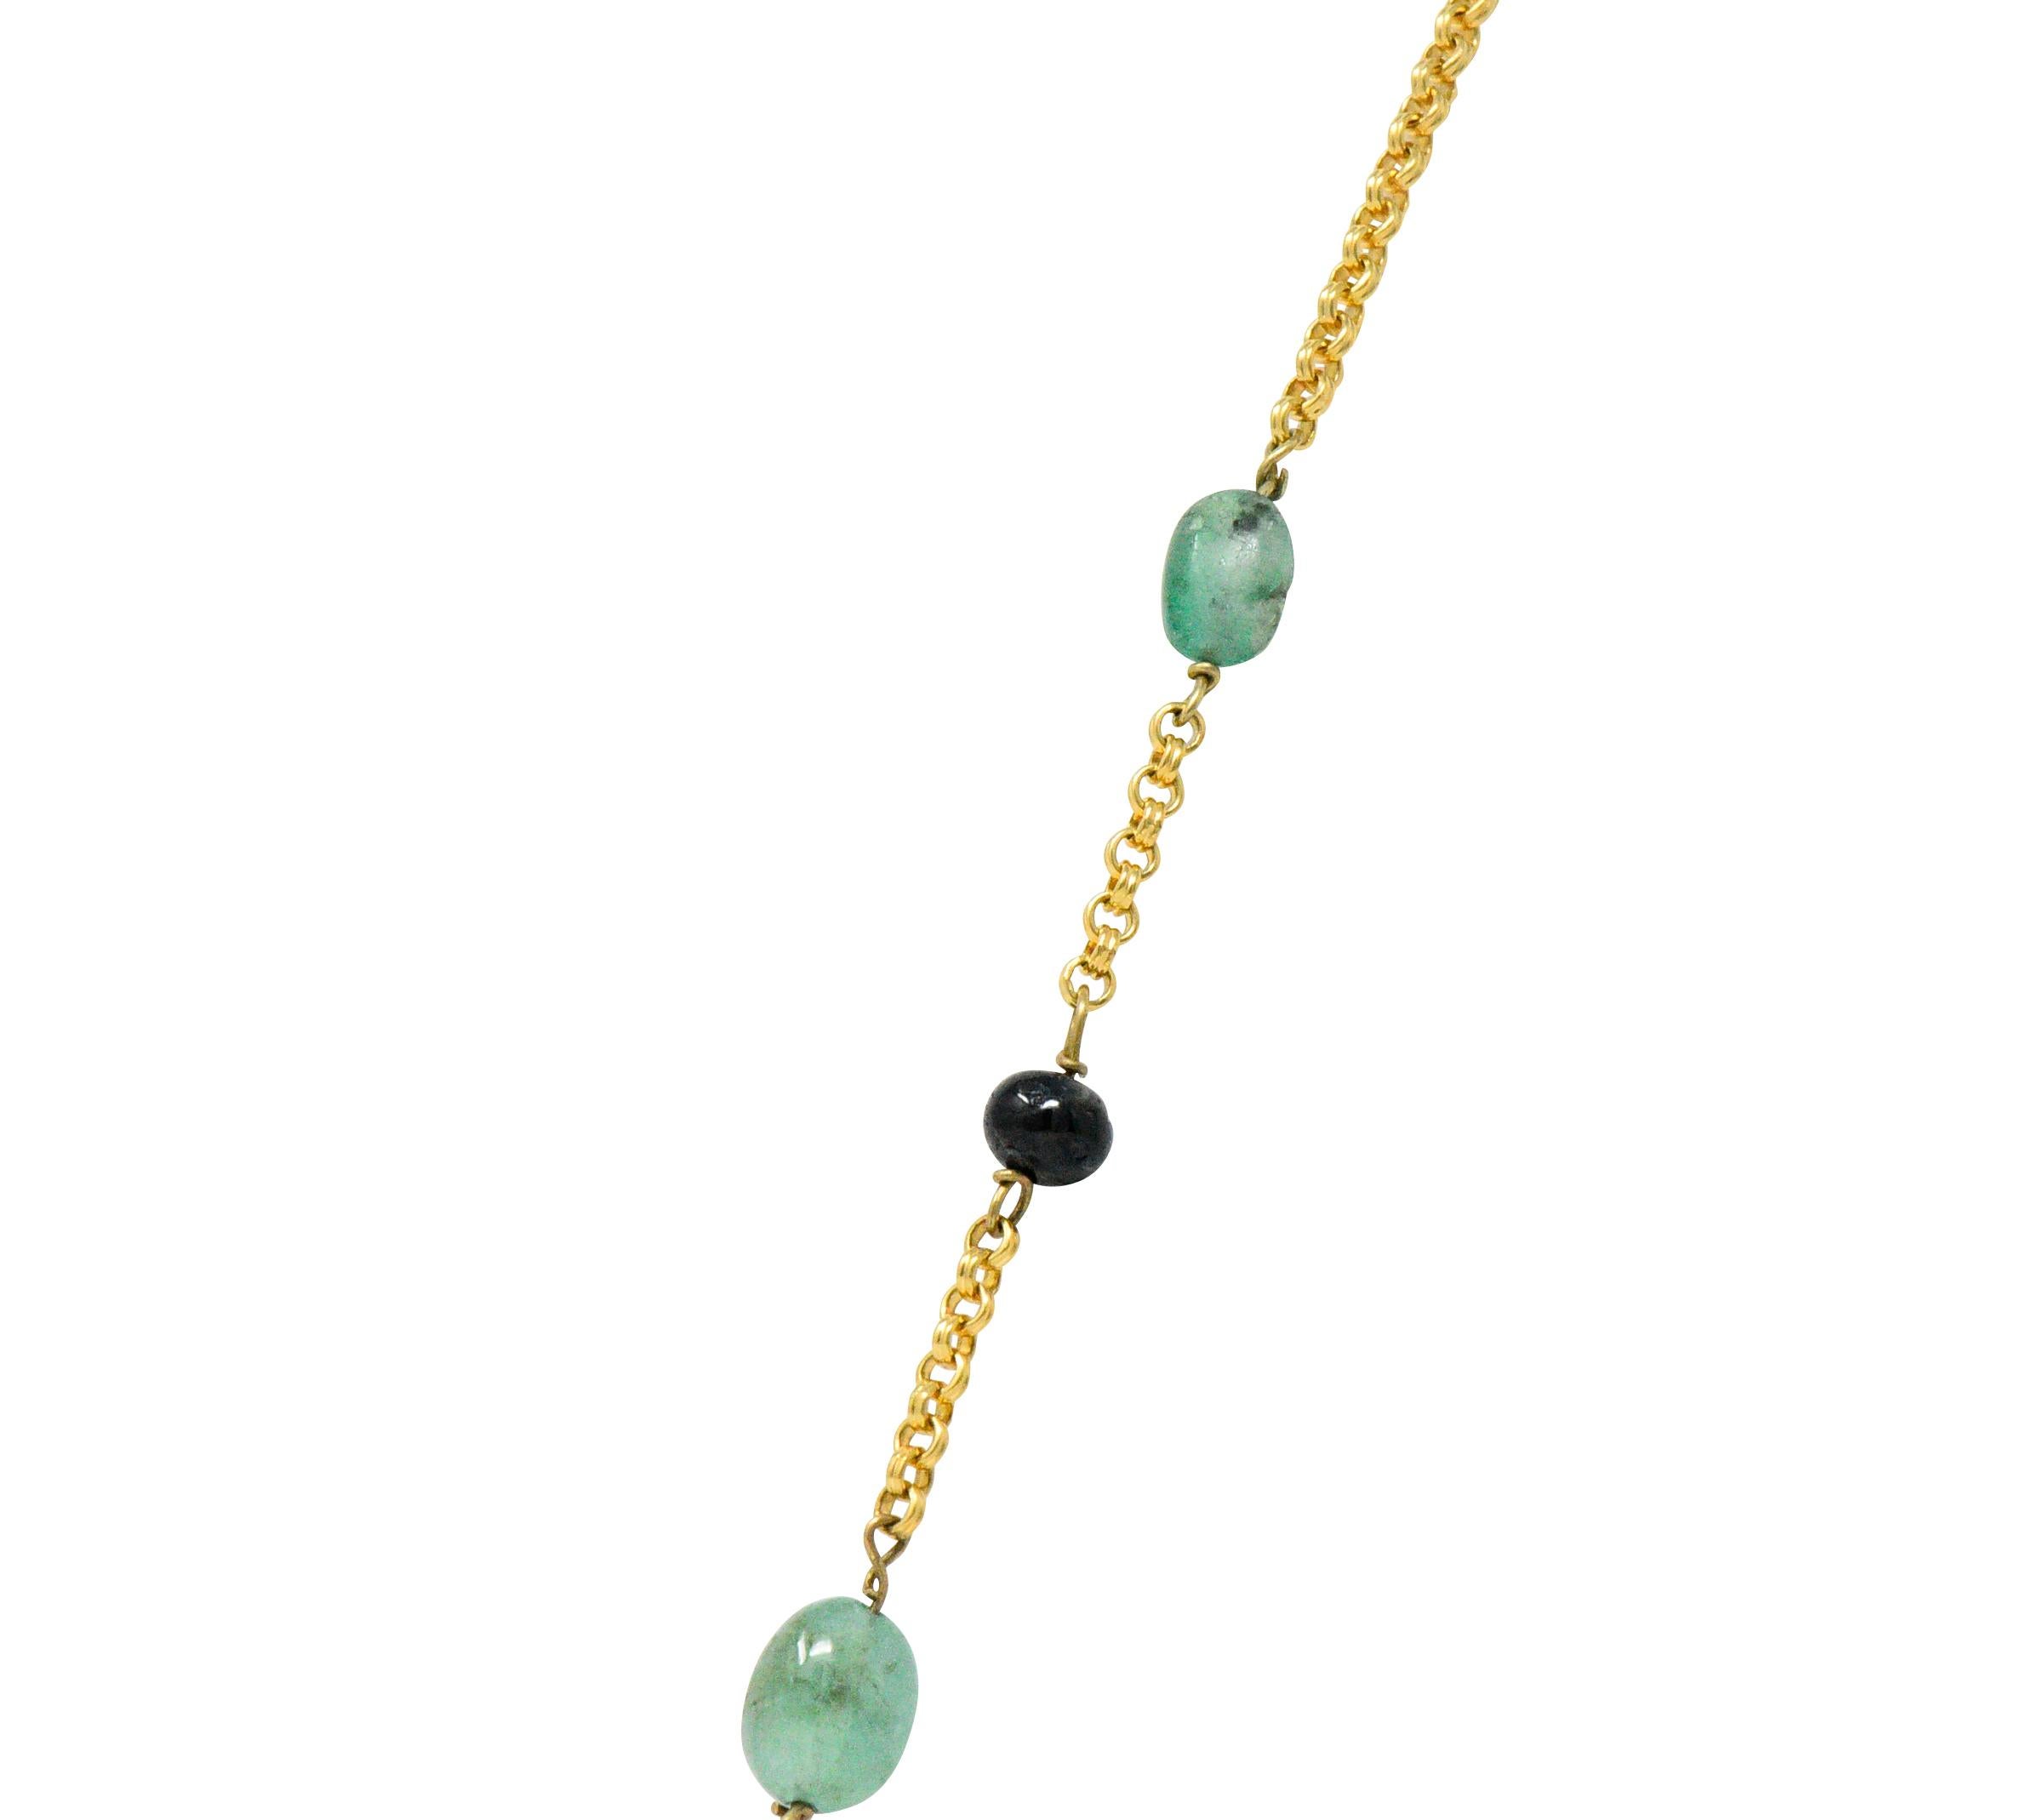 Rolo style chain featuring seven tumbled emeralds, four round sapphire beads, and two ruby beads

Each are naturally included with emerald a medium-light sea green, dark blueberry sapphires, and dark violetish-red ruby

Completed by a spring ring